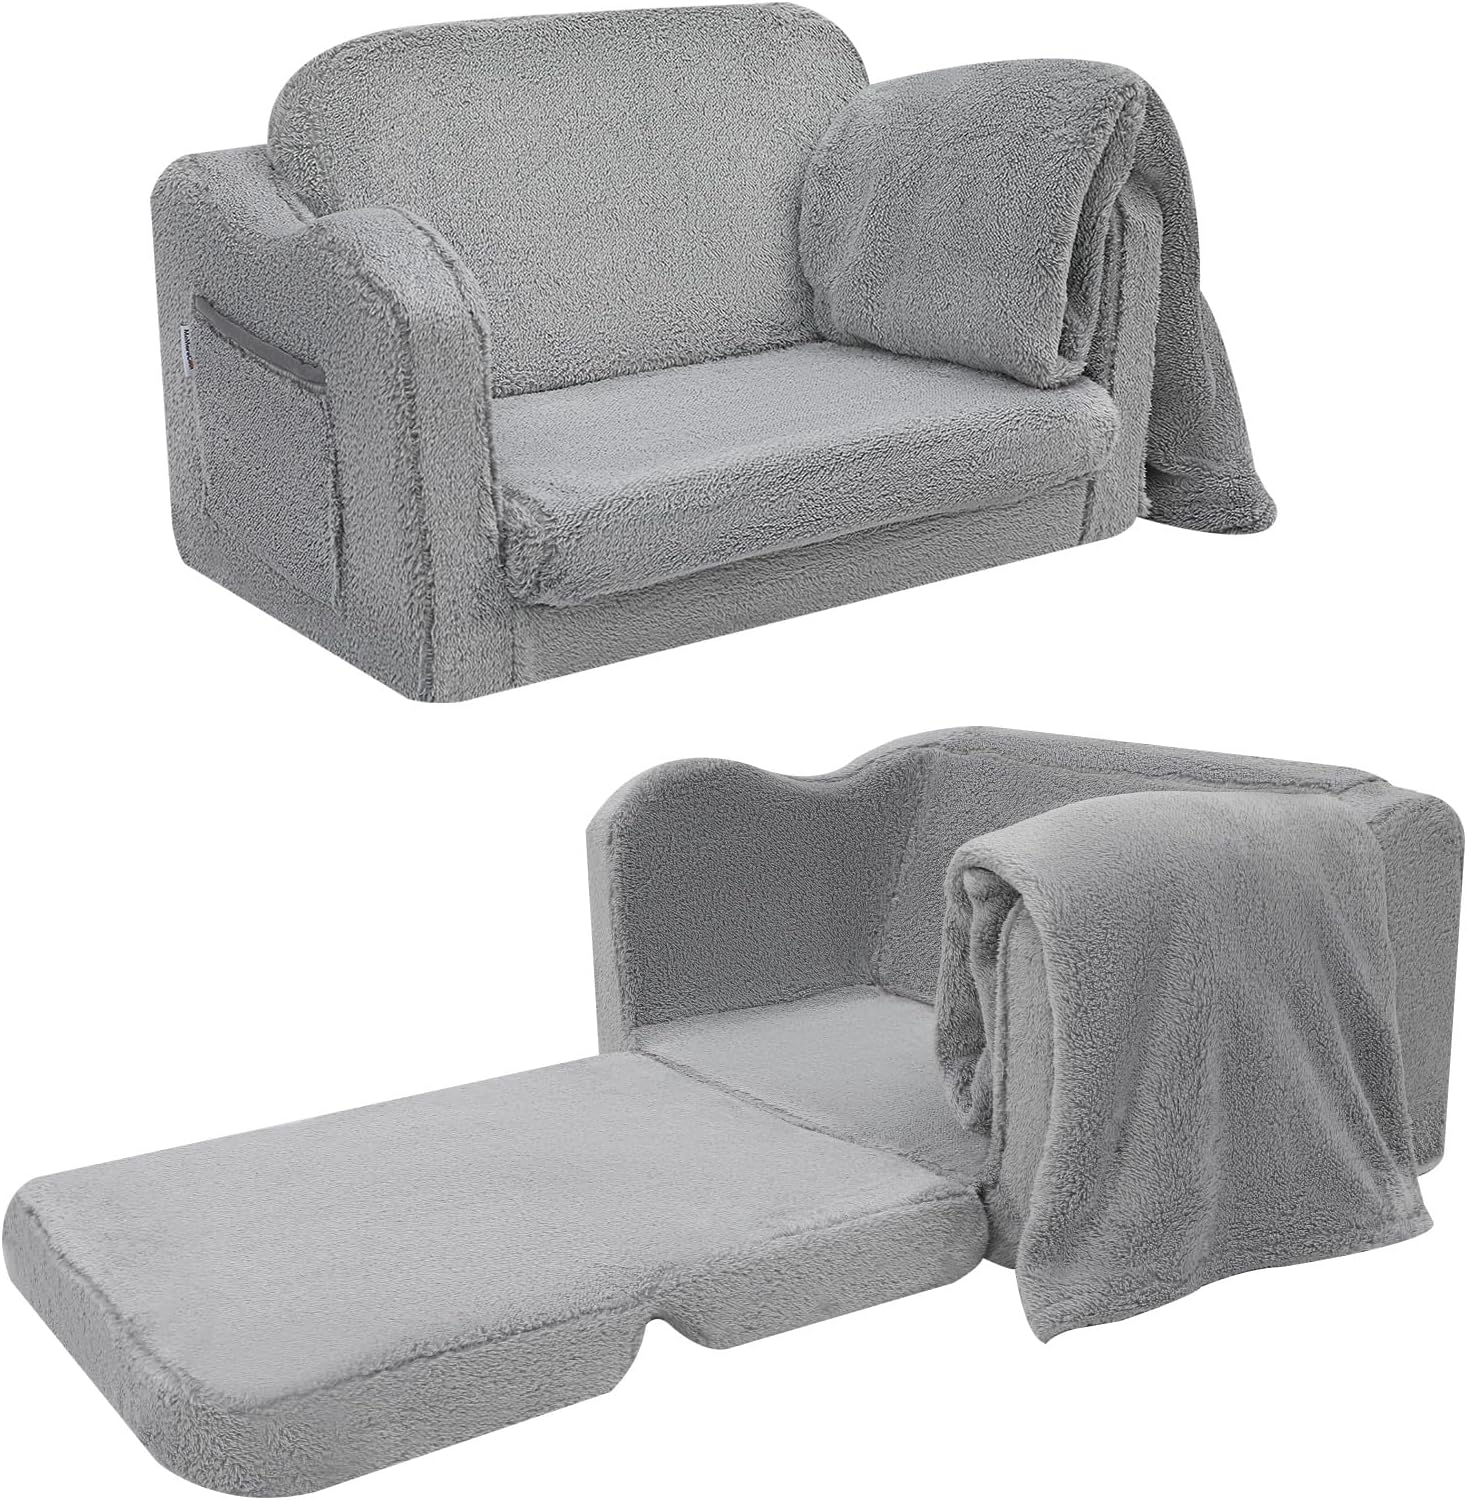 MeMoreCool Toddler Couch Fold Out Kids Couch for Playroom, Flip Out Kids Chair for Toddlers Girls Boys, Fold Up Kids Sofa Convertible Toddler Sofa to Folding Lounger, Pull Out Baby Couch Plush Grey